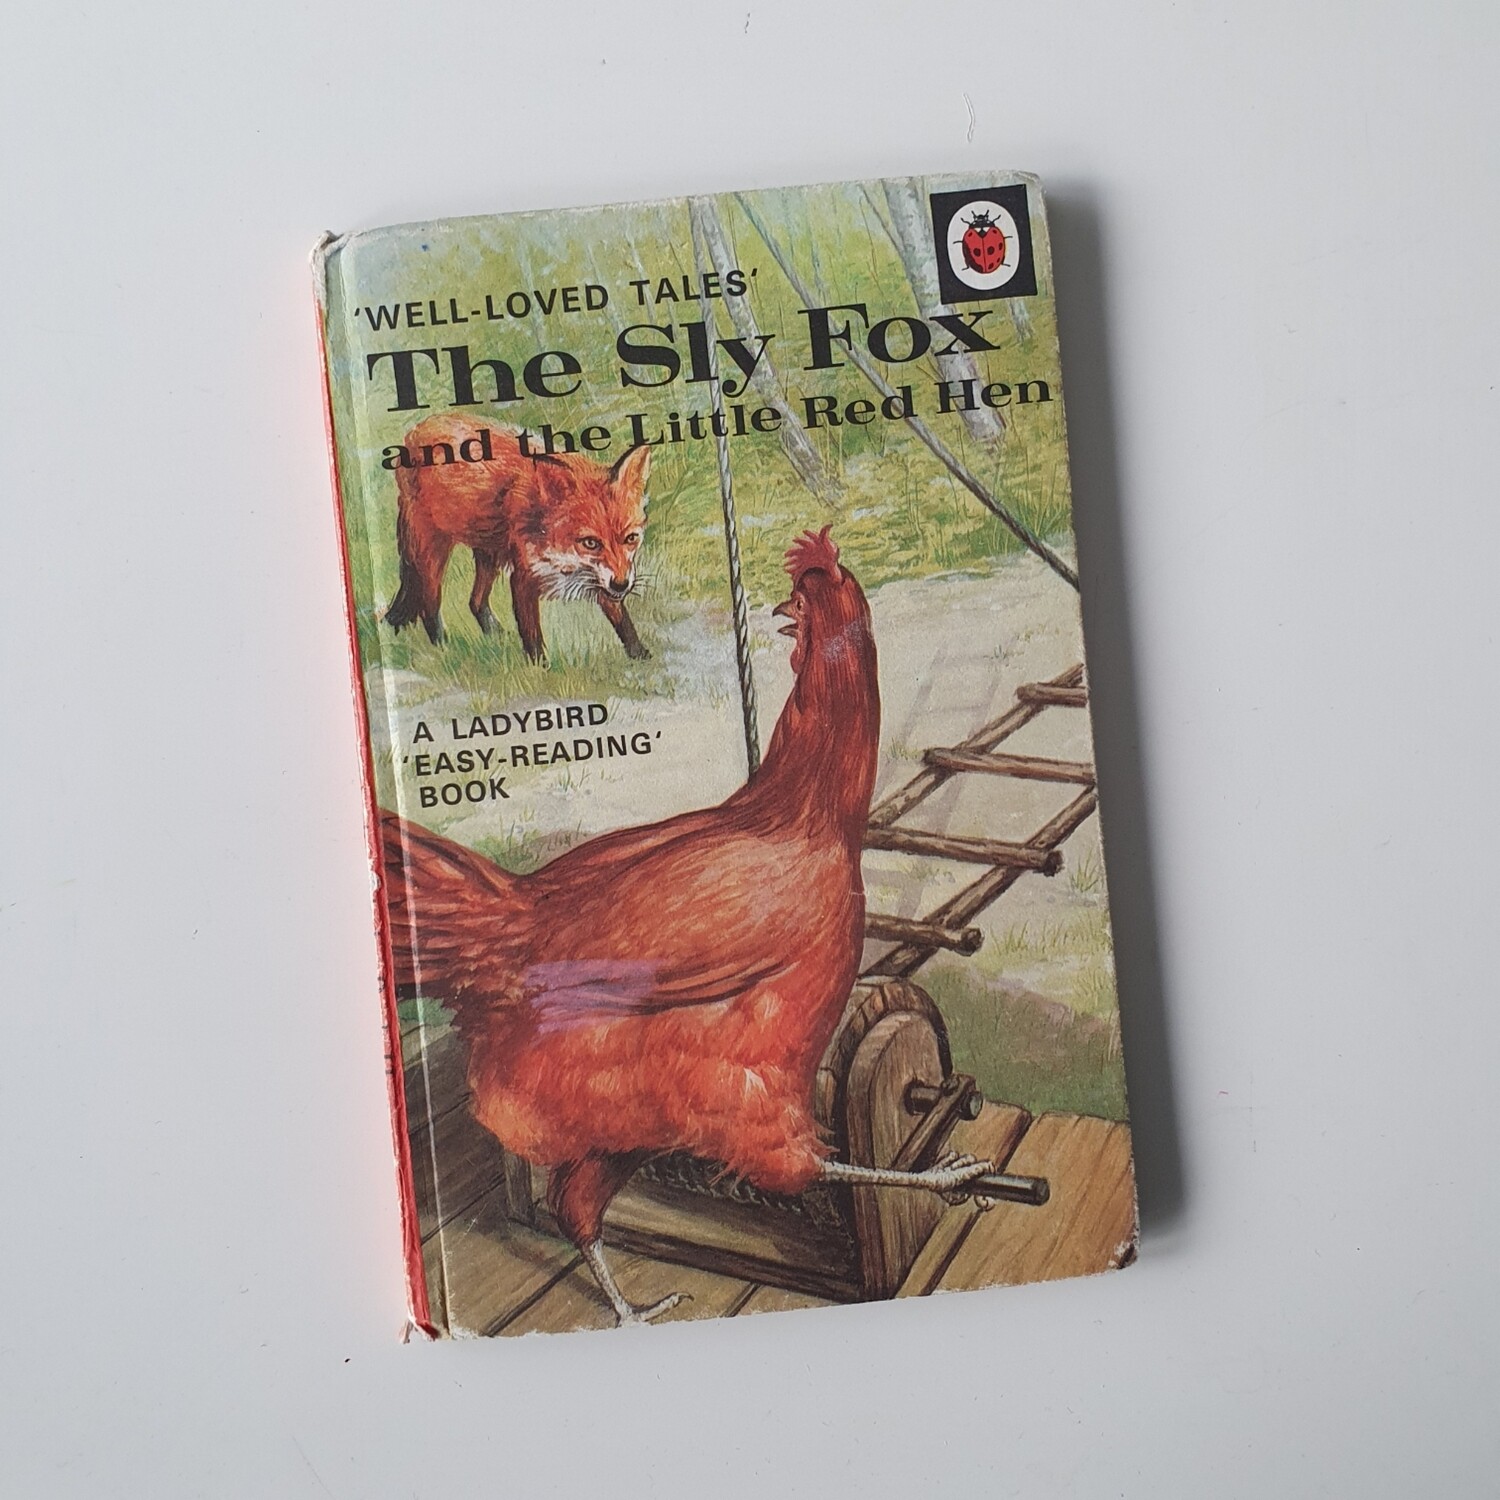 The Sly Fox and the Little Red Hen Notebook - Ladybird book - well loved tales